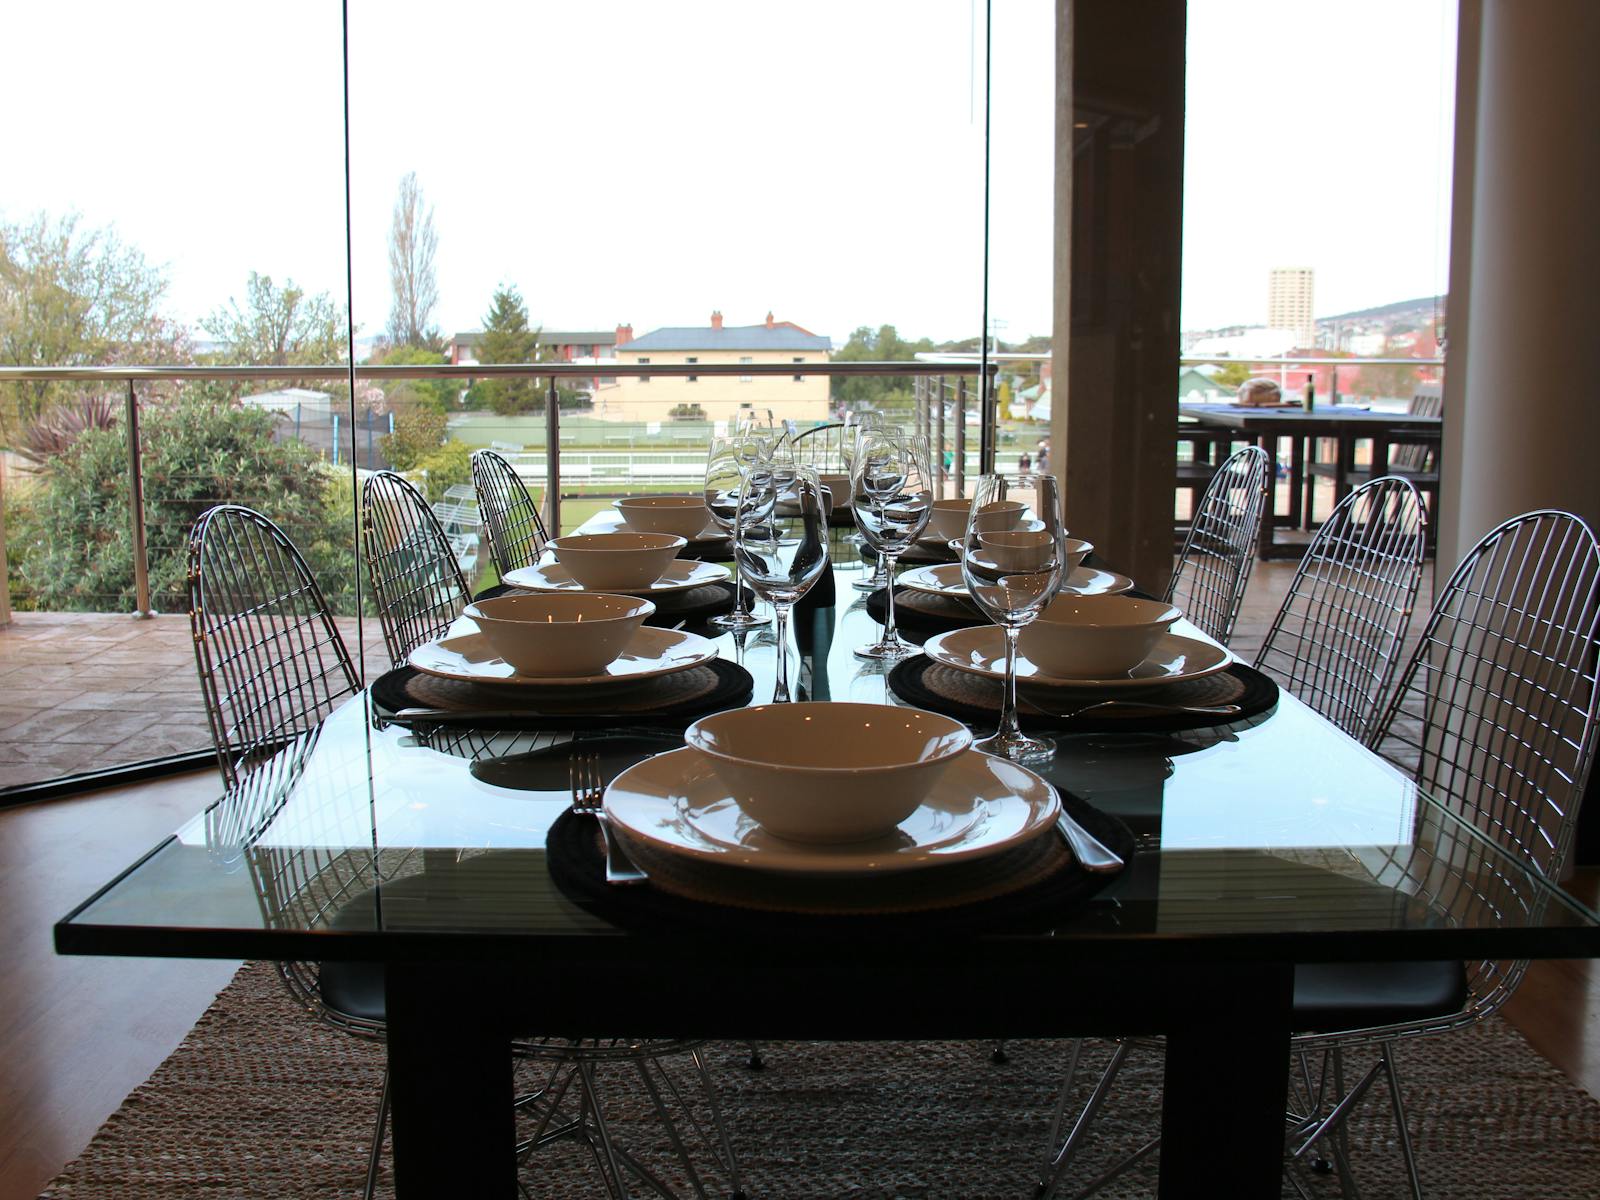 Dining Table overlooking the patio